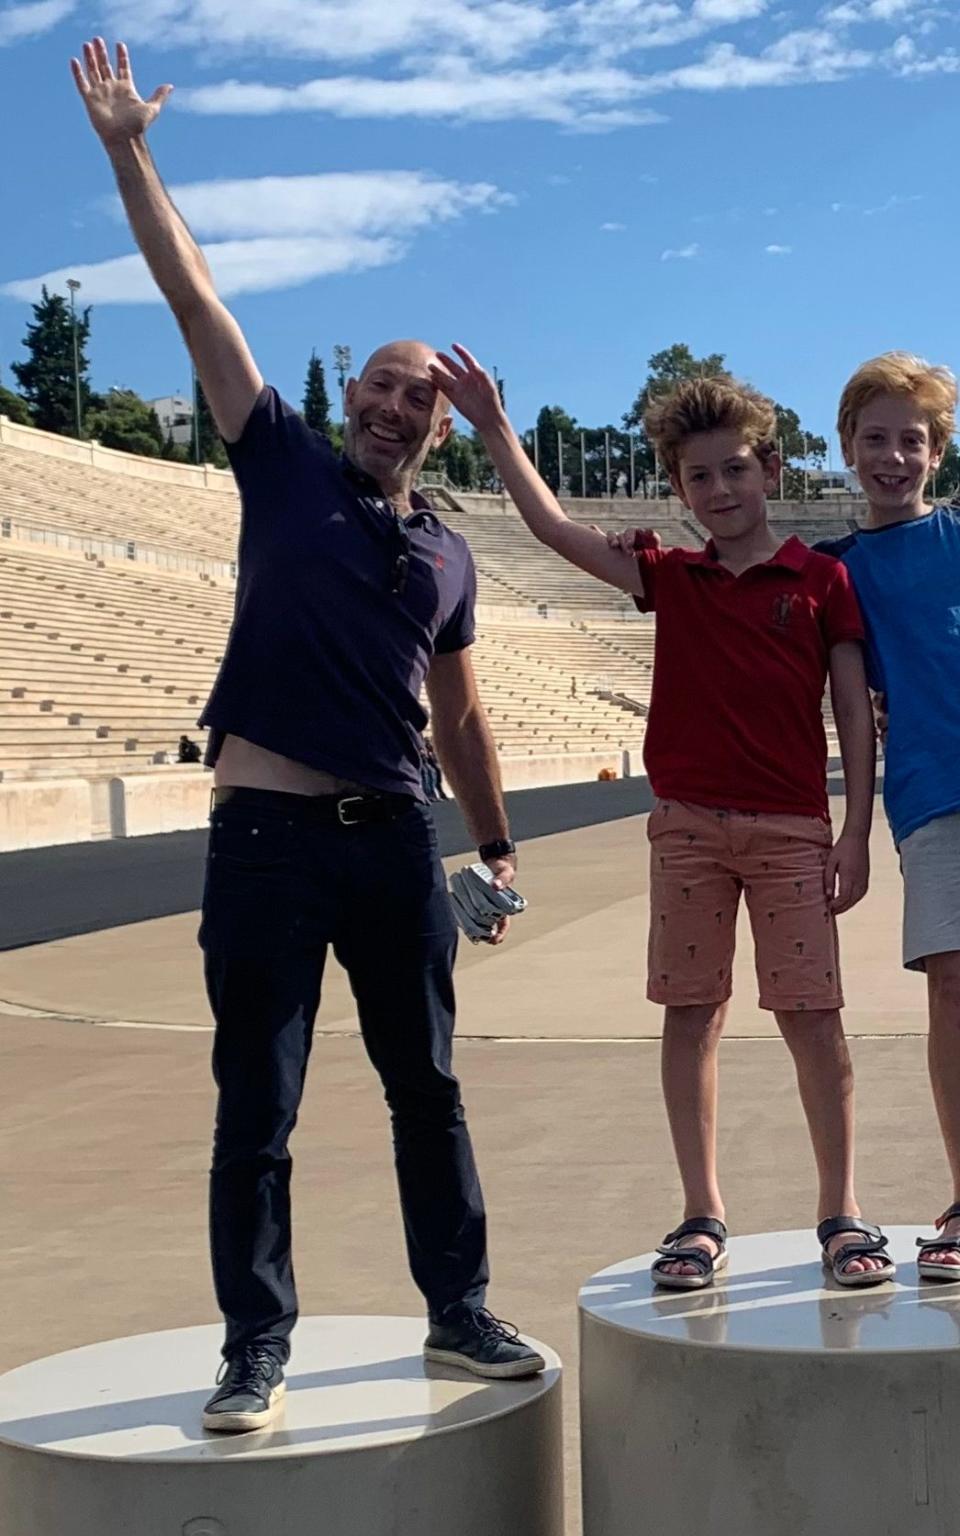 The family visited the Panathenaic Stadium, where the original Olympians competed